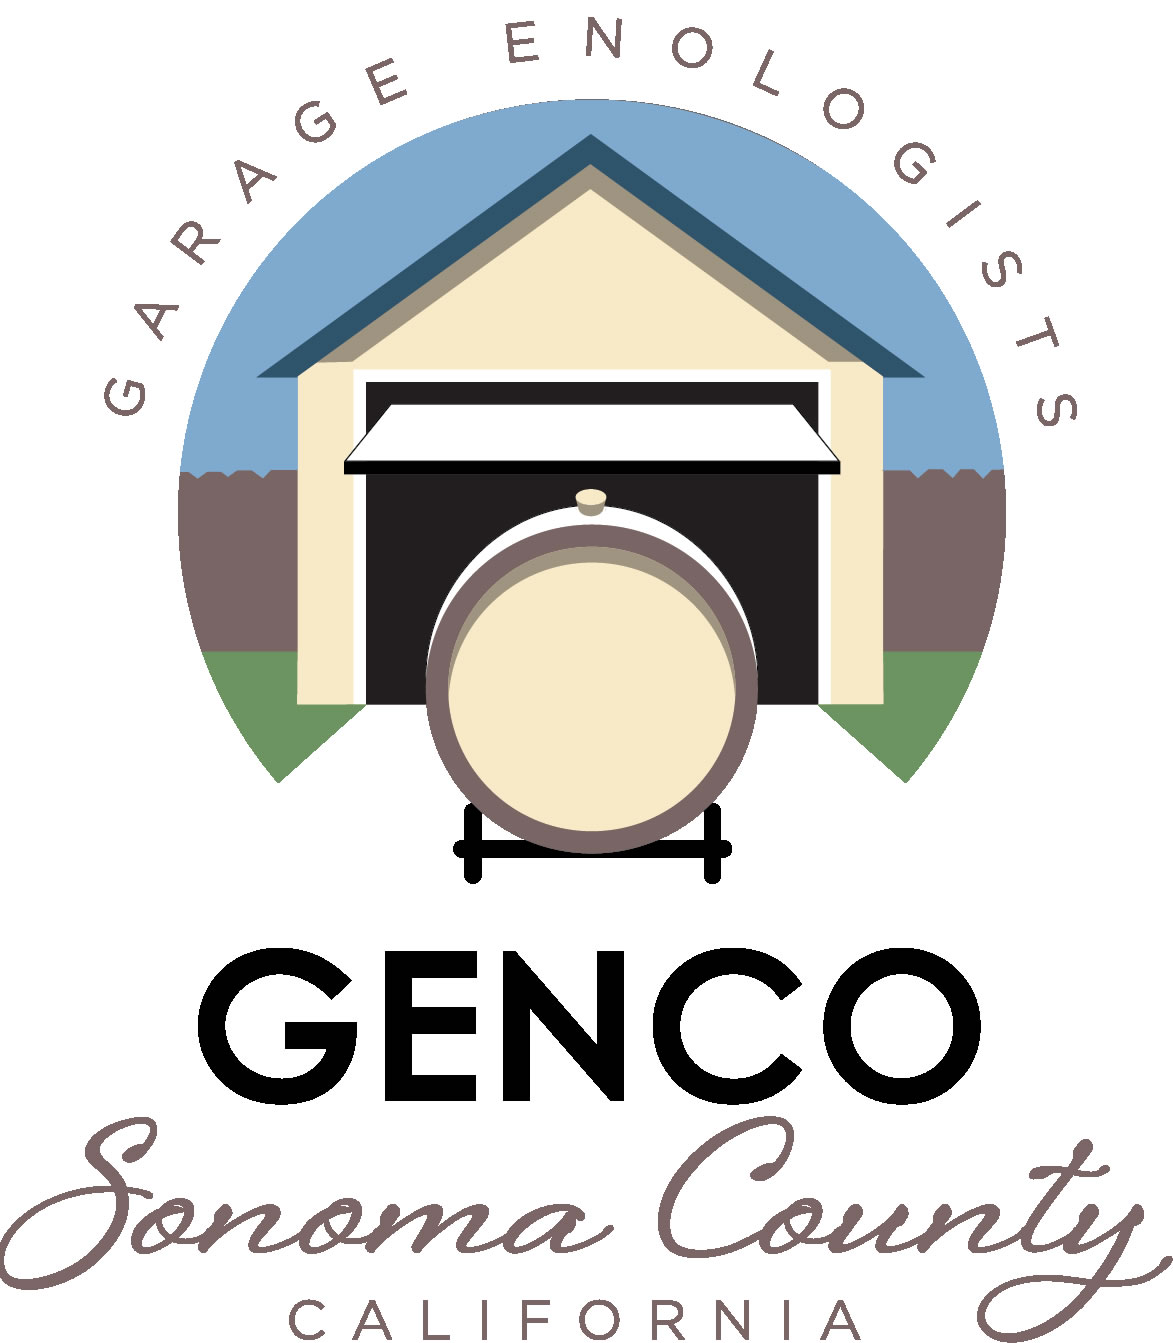 About GENCO winemakers